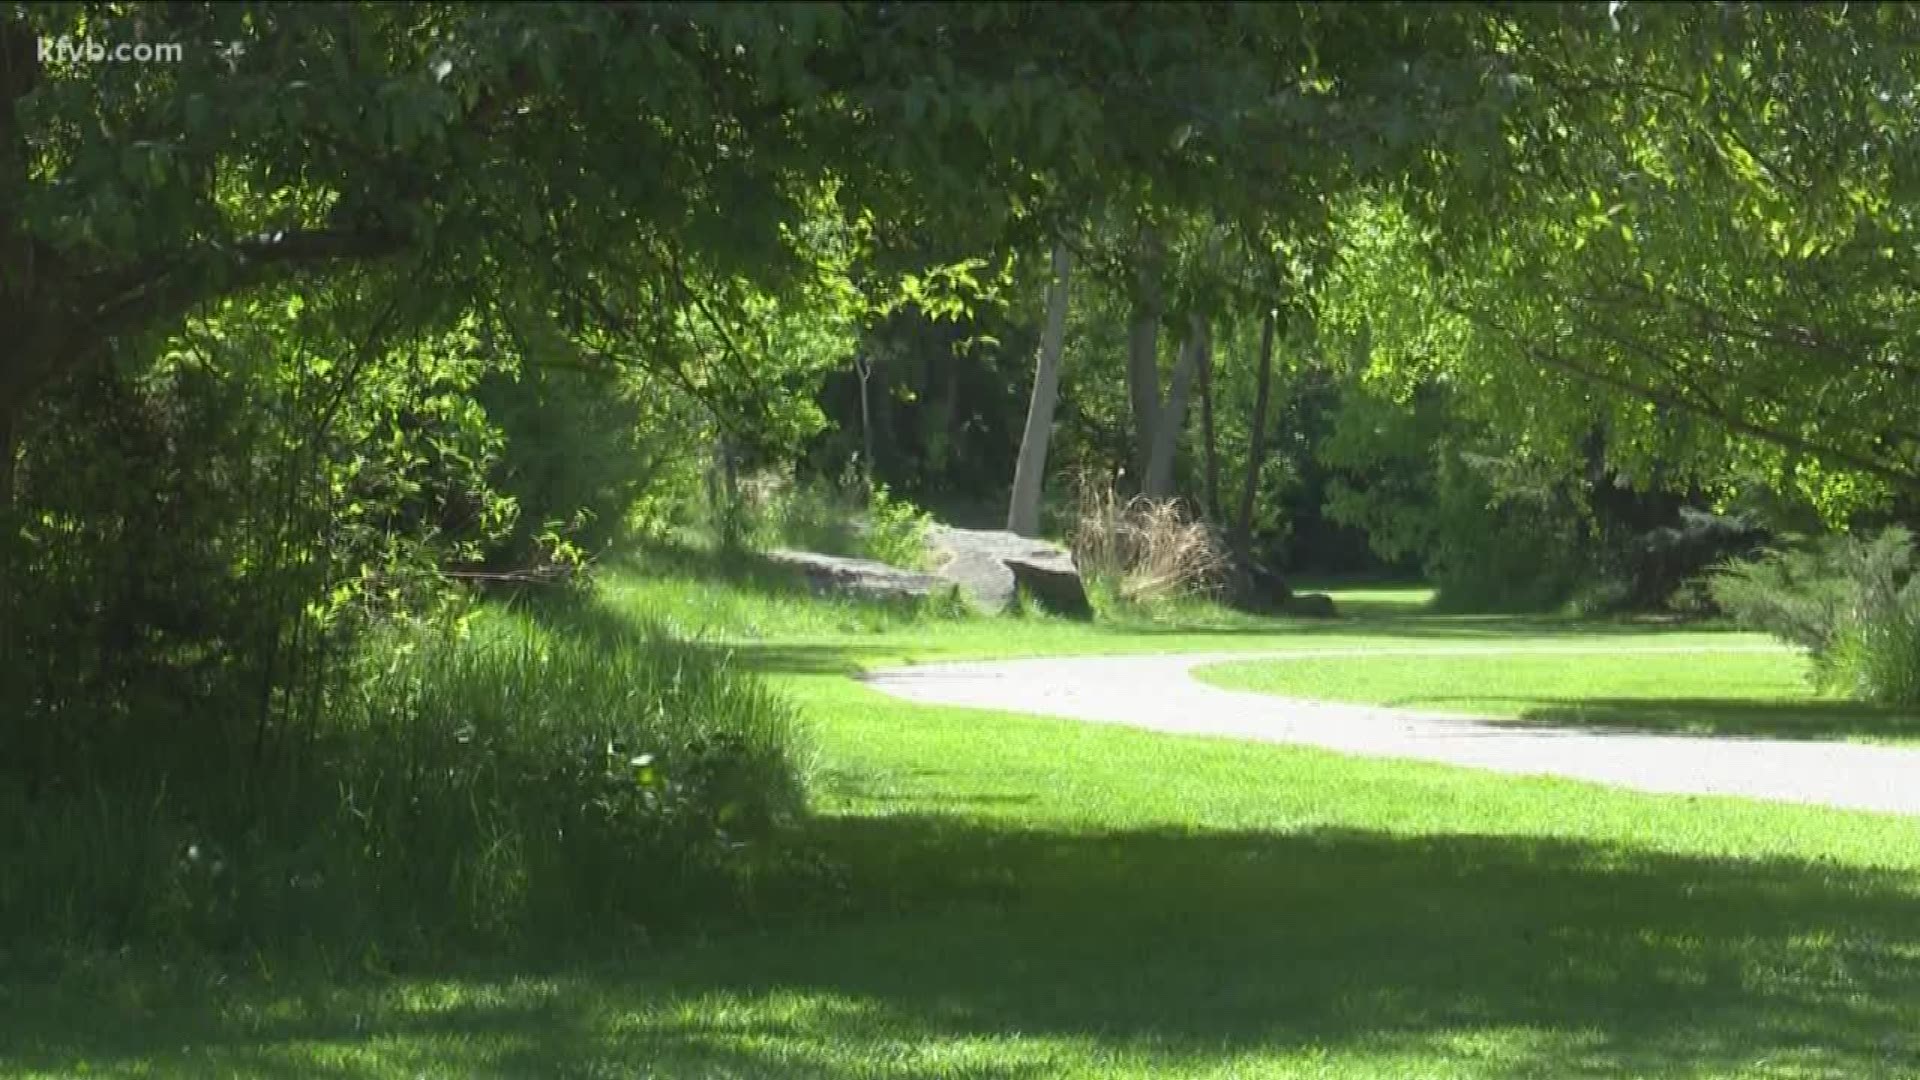 Upgrades proposed at Kathryn Albertson Park.